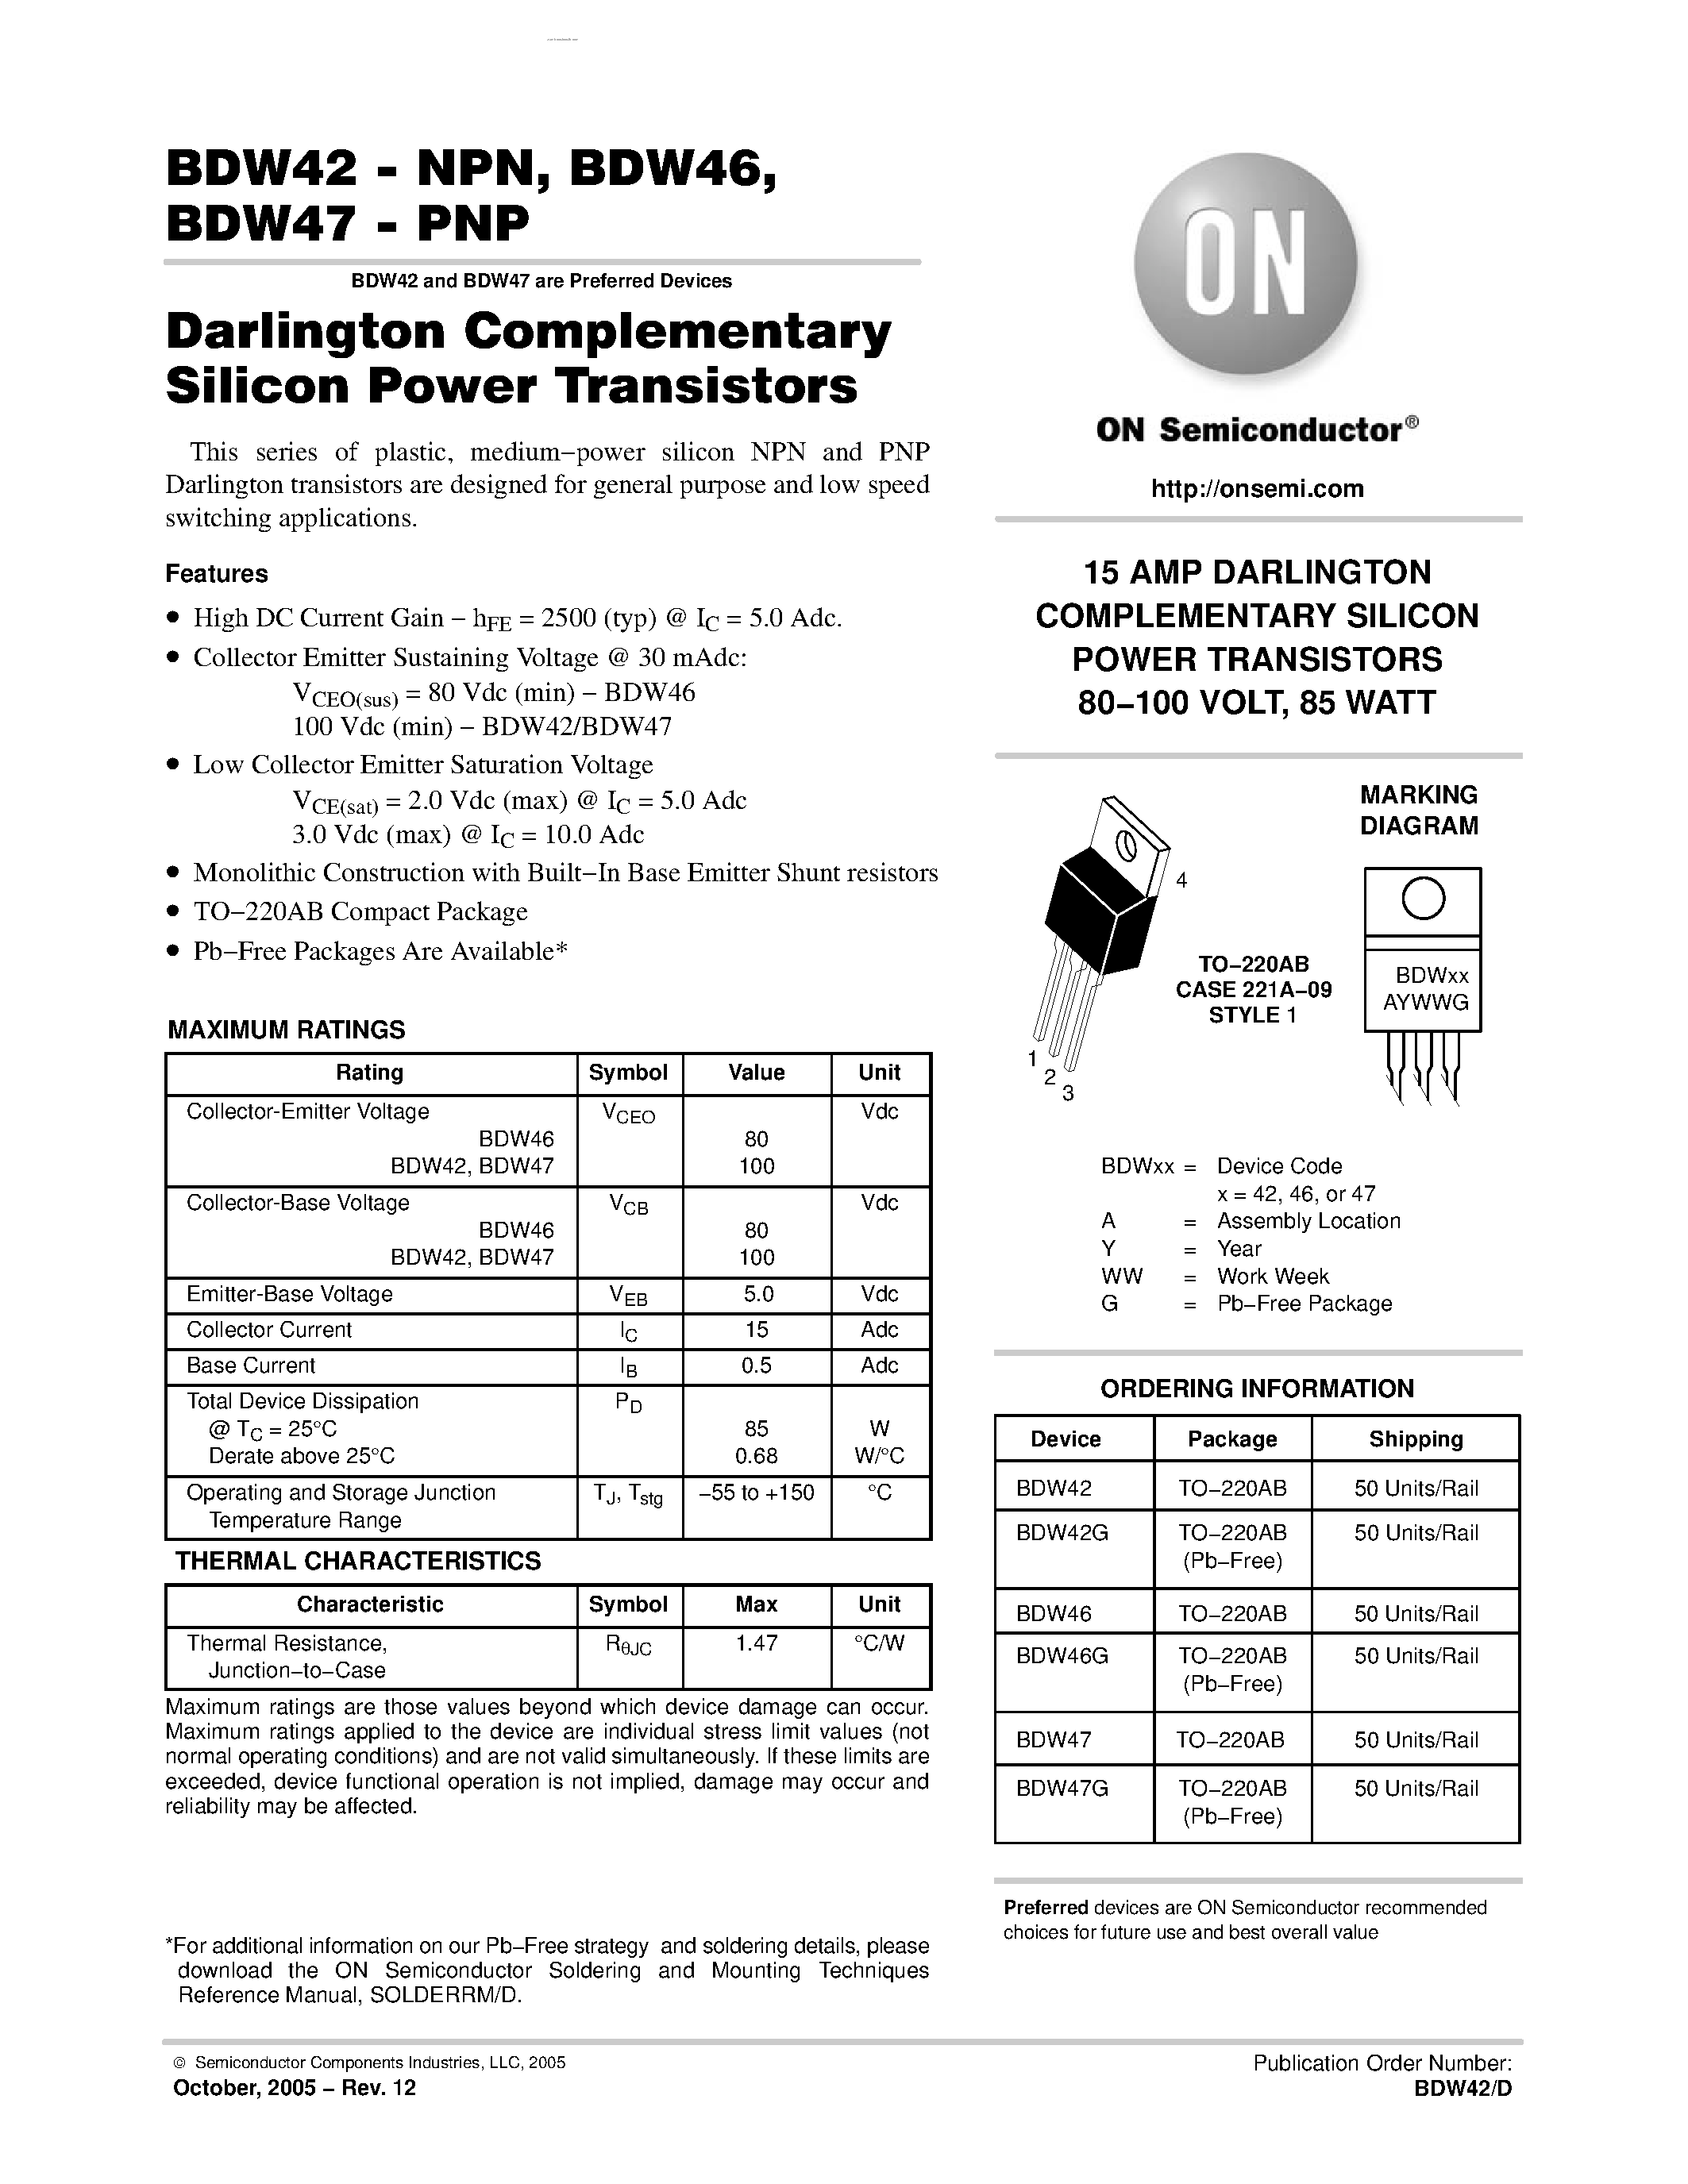 Даташит BDW46 - DARLINGTON COMPLEMENTARY SILICON POWER TRANSISTORS страница 1